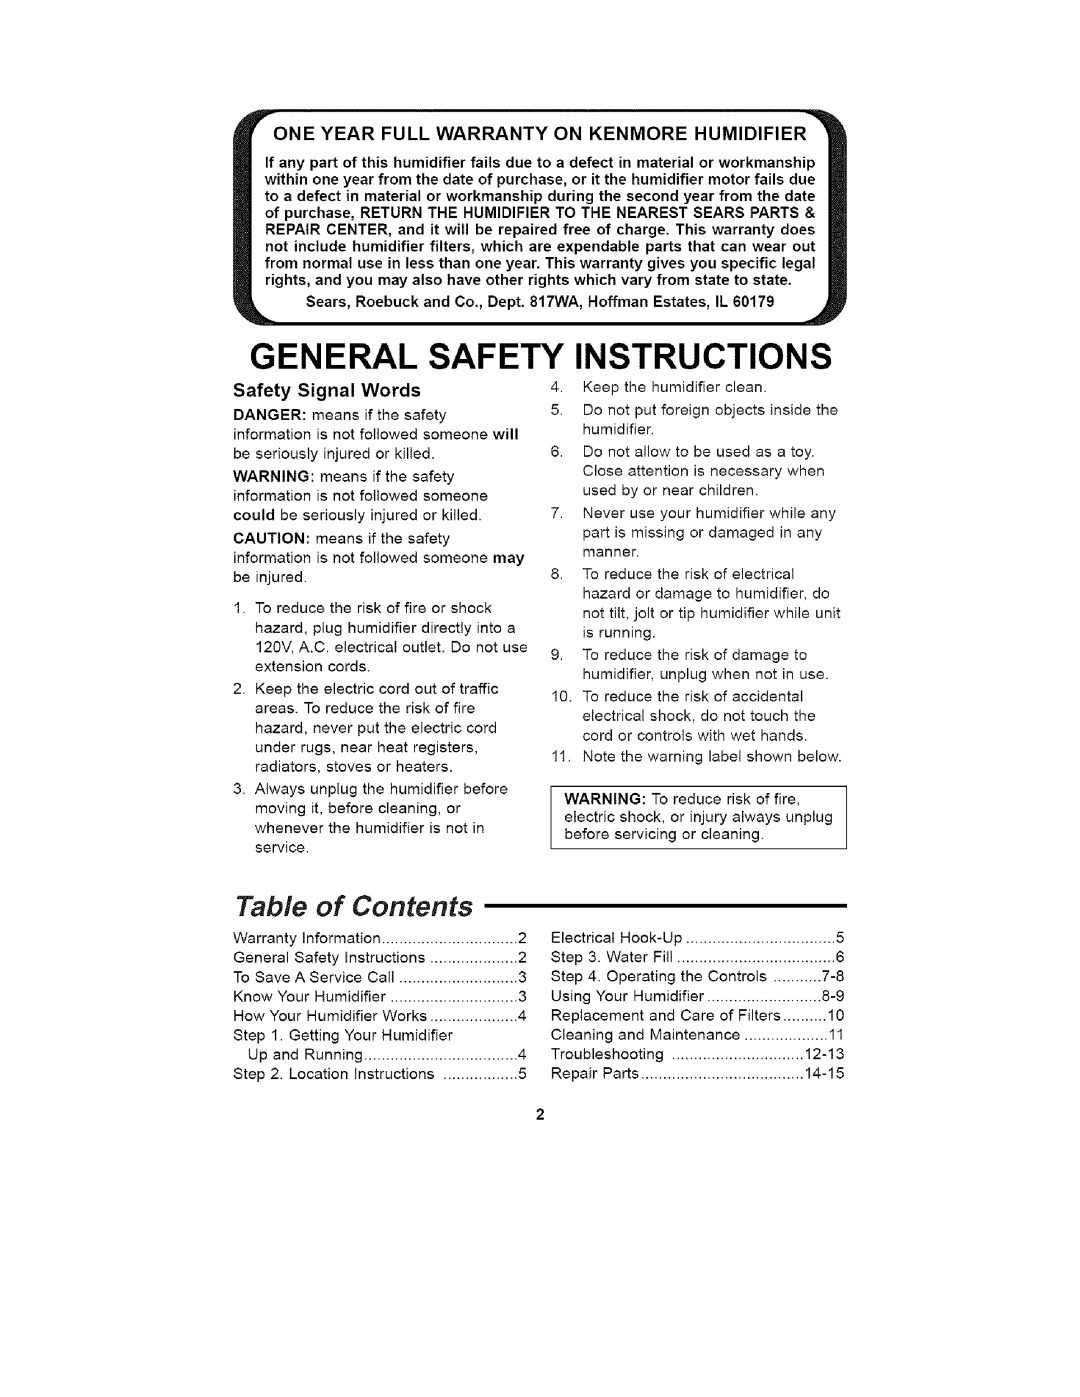 Kenmore 758.15408 General Safety Instructions, Table, Contents, P_One Year Full Warranty On Kenmore Humidifier _, Signal 